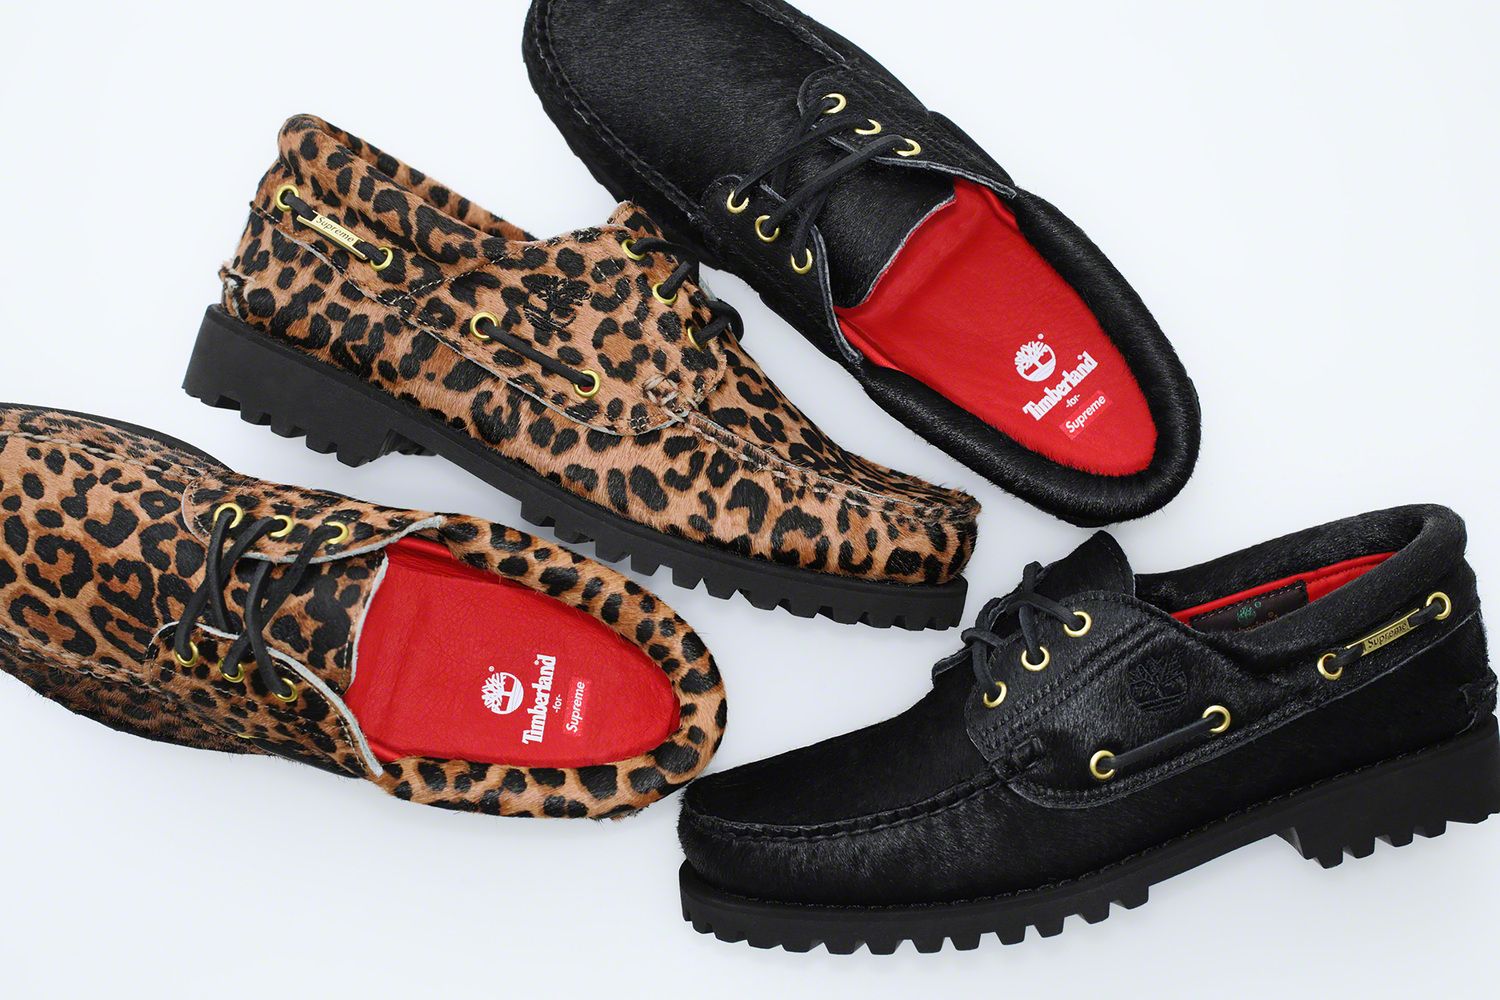 Supreme and Timberland Collaborate on the 3-Eye Classic Lug Sole Shoe